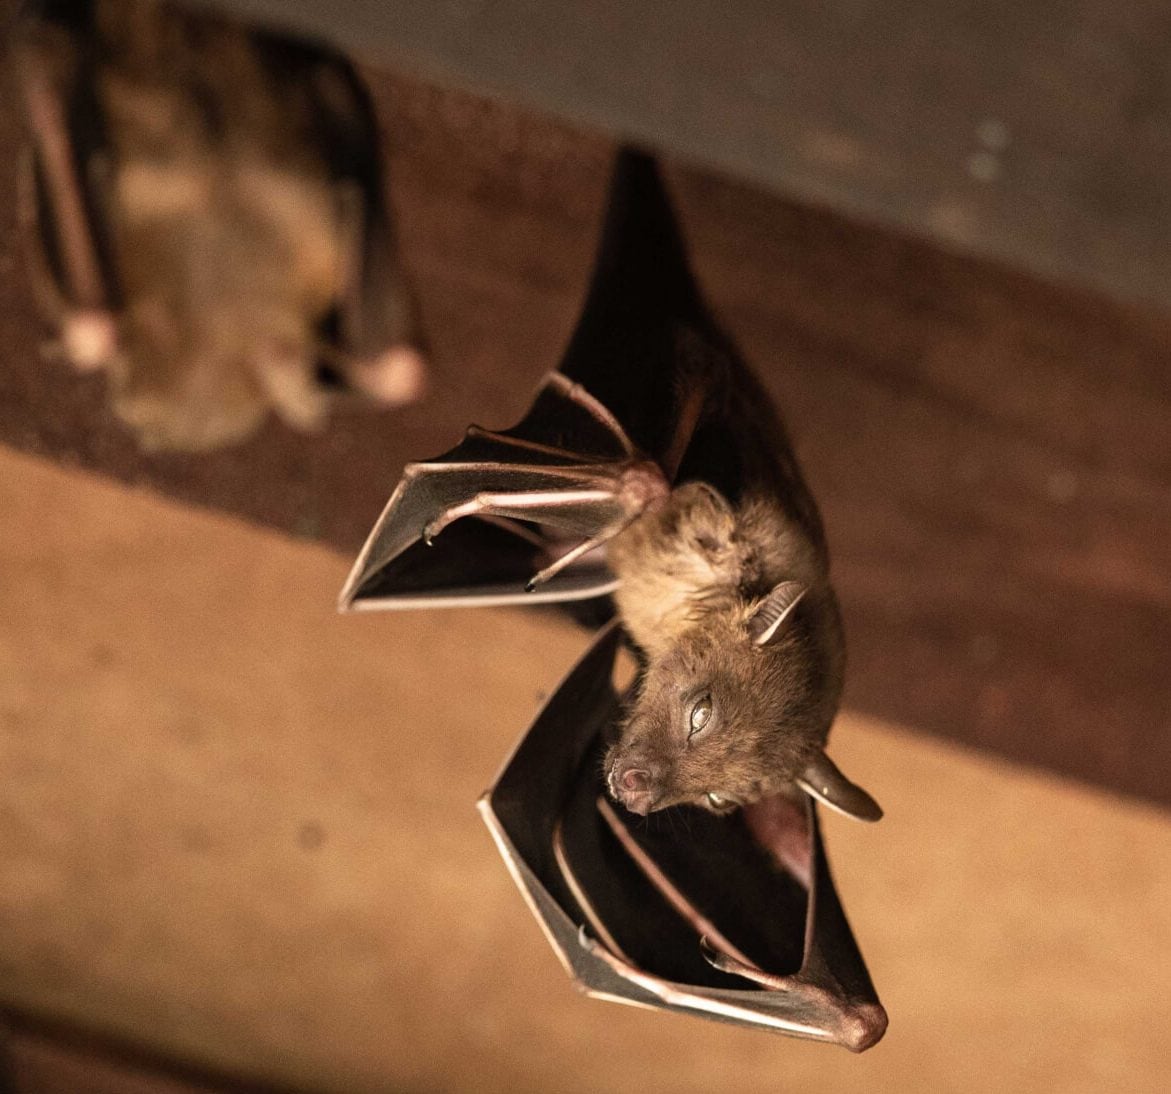 Expert bat removal services for a safe and humane solution in Cranston